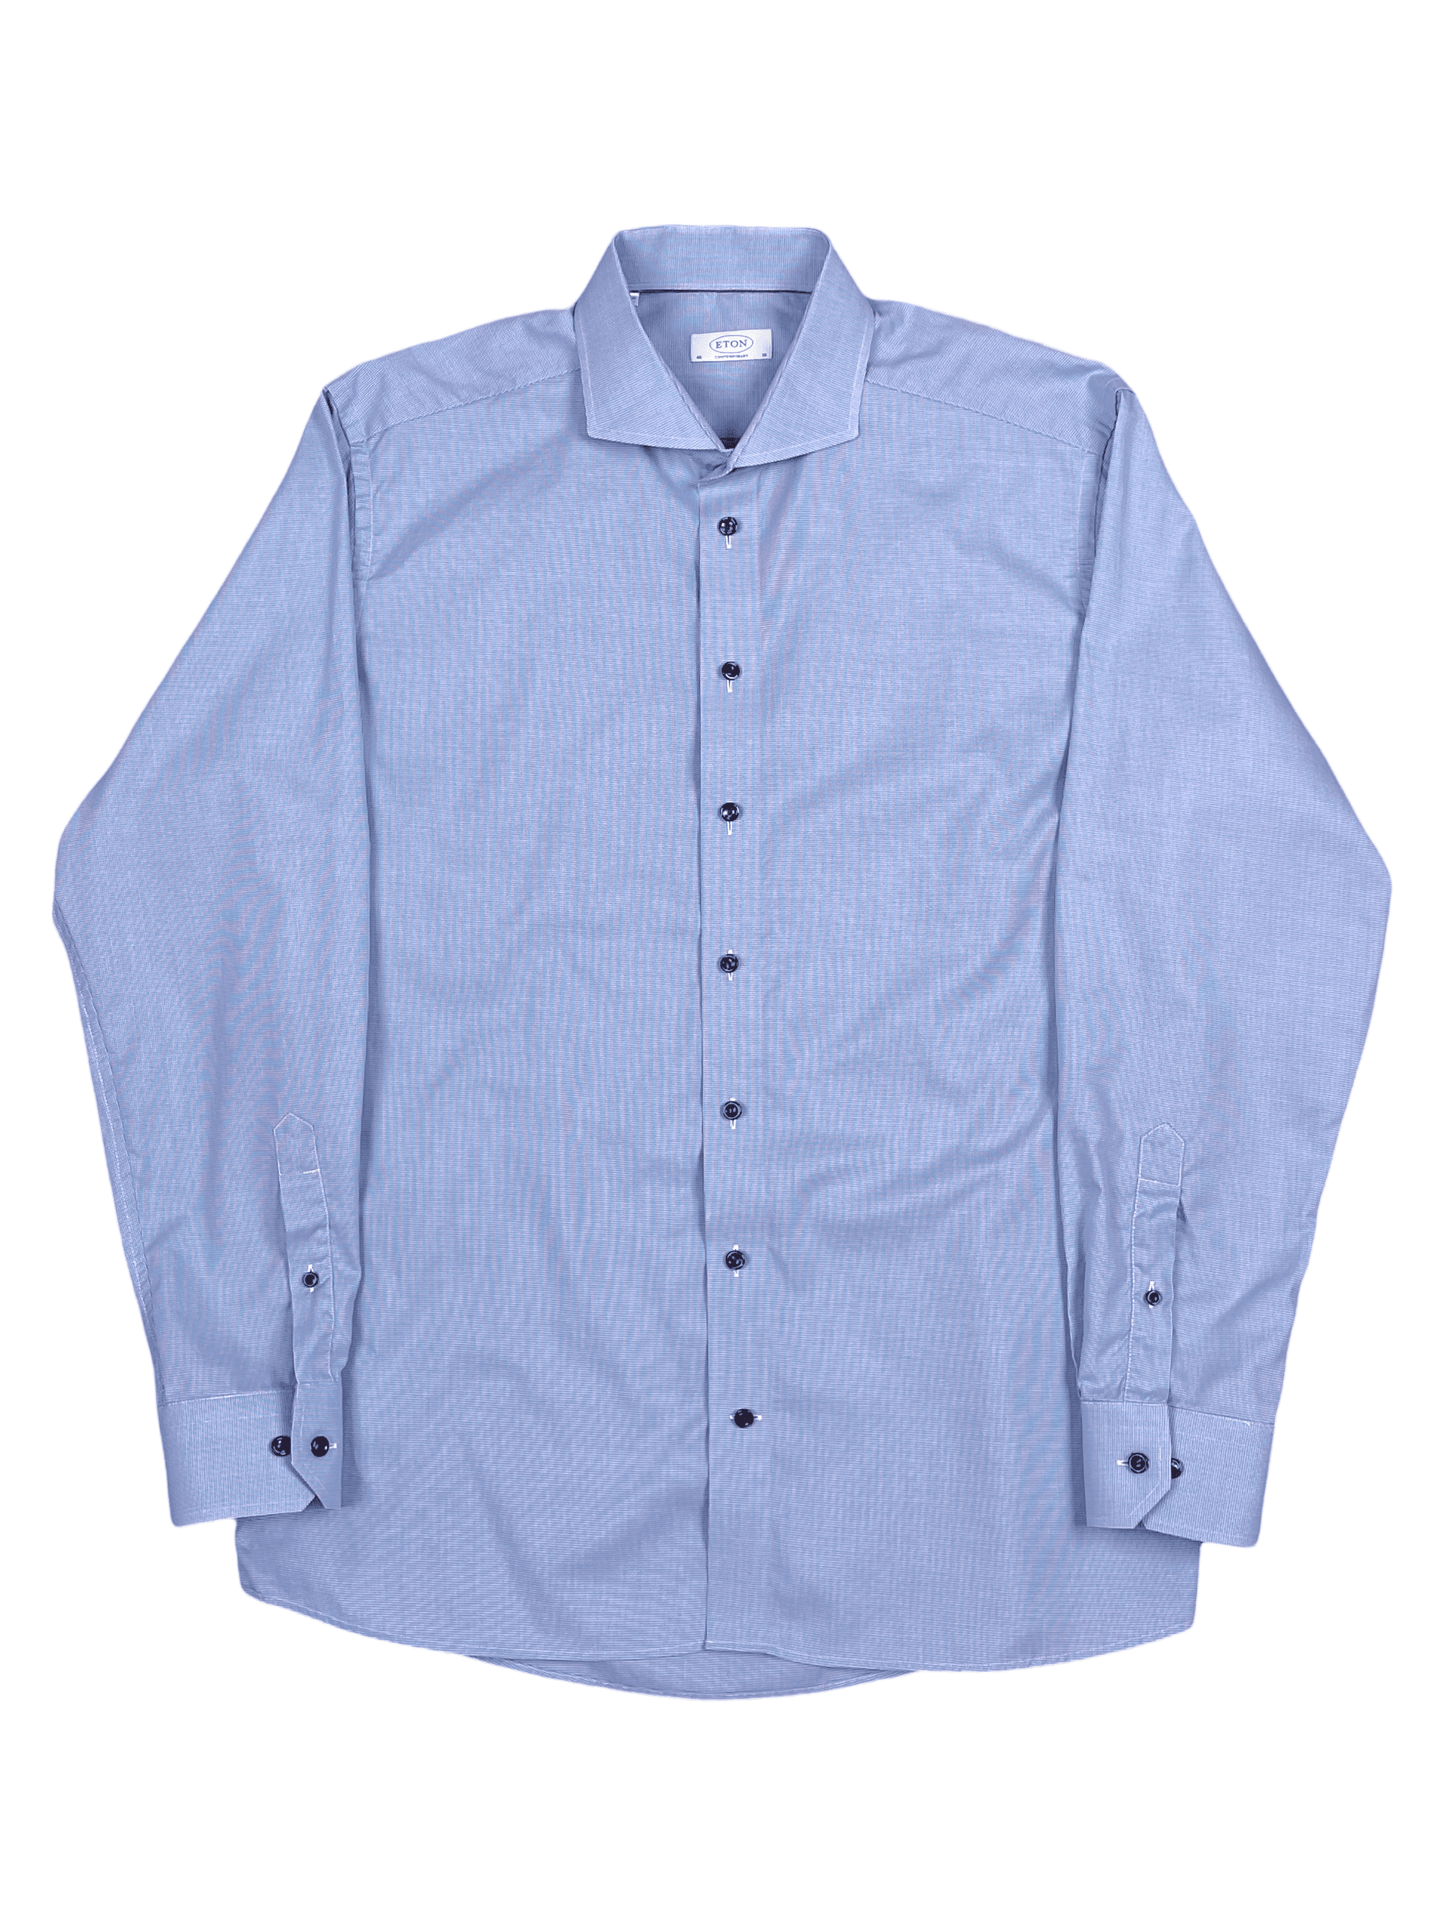 Eton Mid Blue Dress Shirt 18 / 46 - Genuine Design Luxury Consignment for Men. New & Pre-Owned Clothing, Shoes, & Accessories. Calgary, Canada